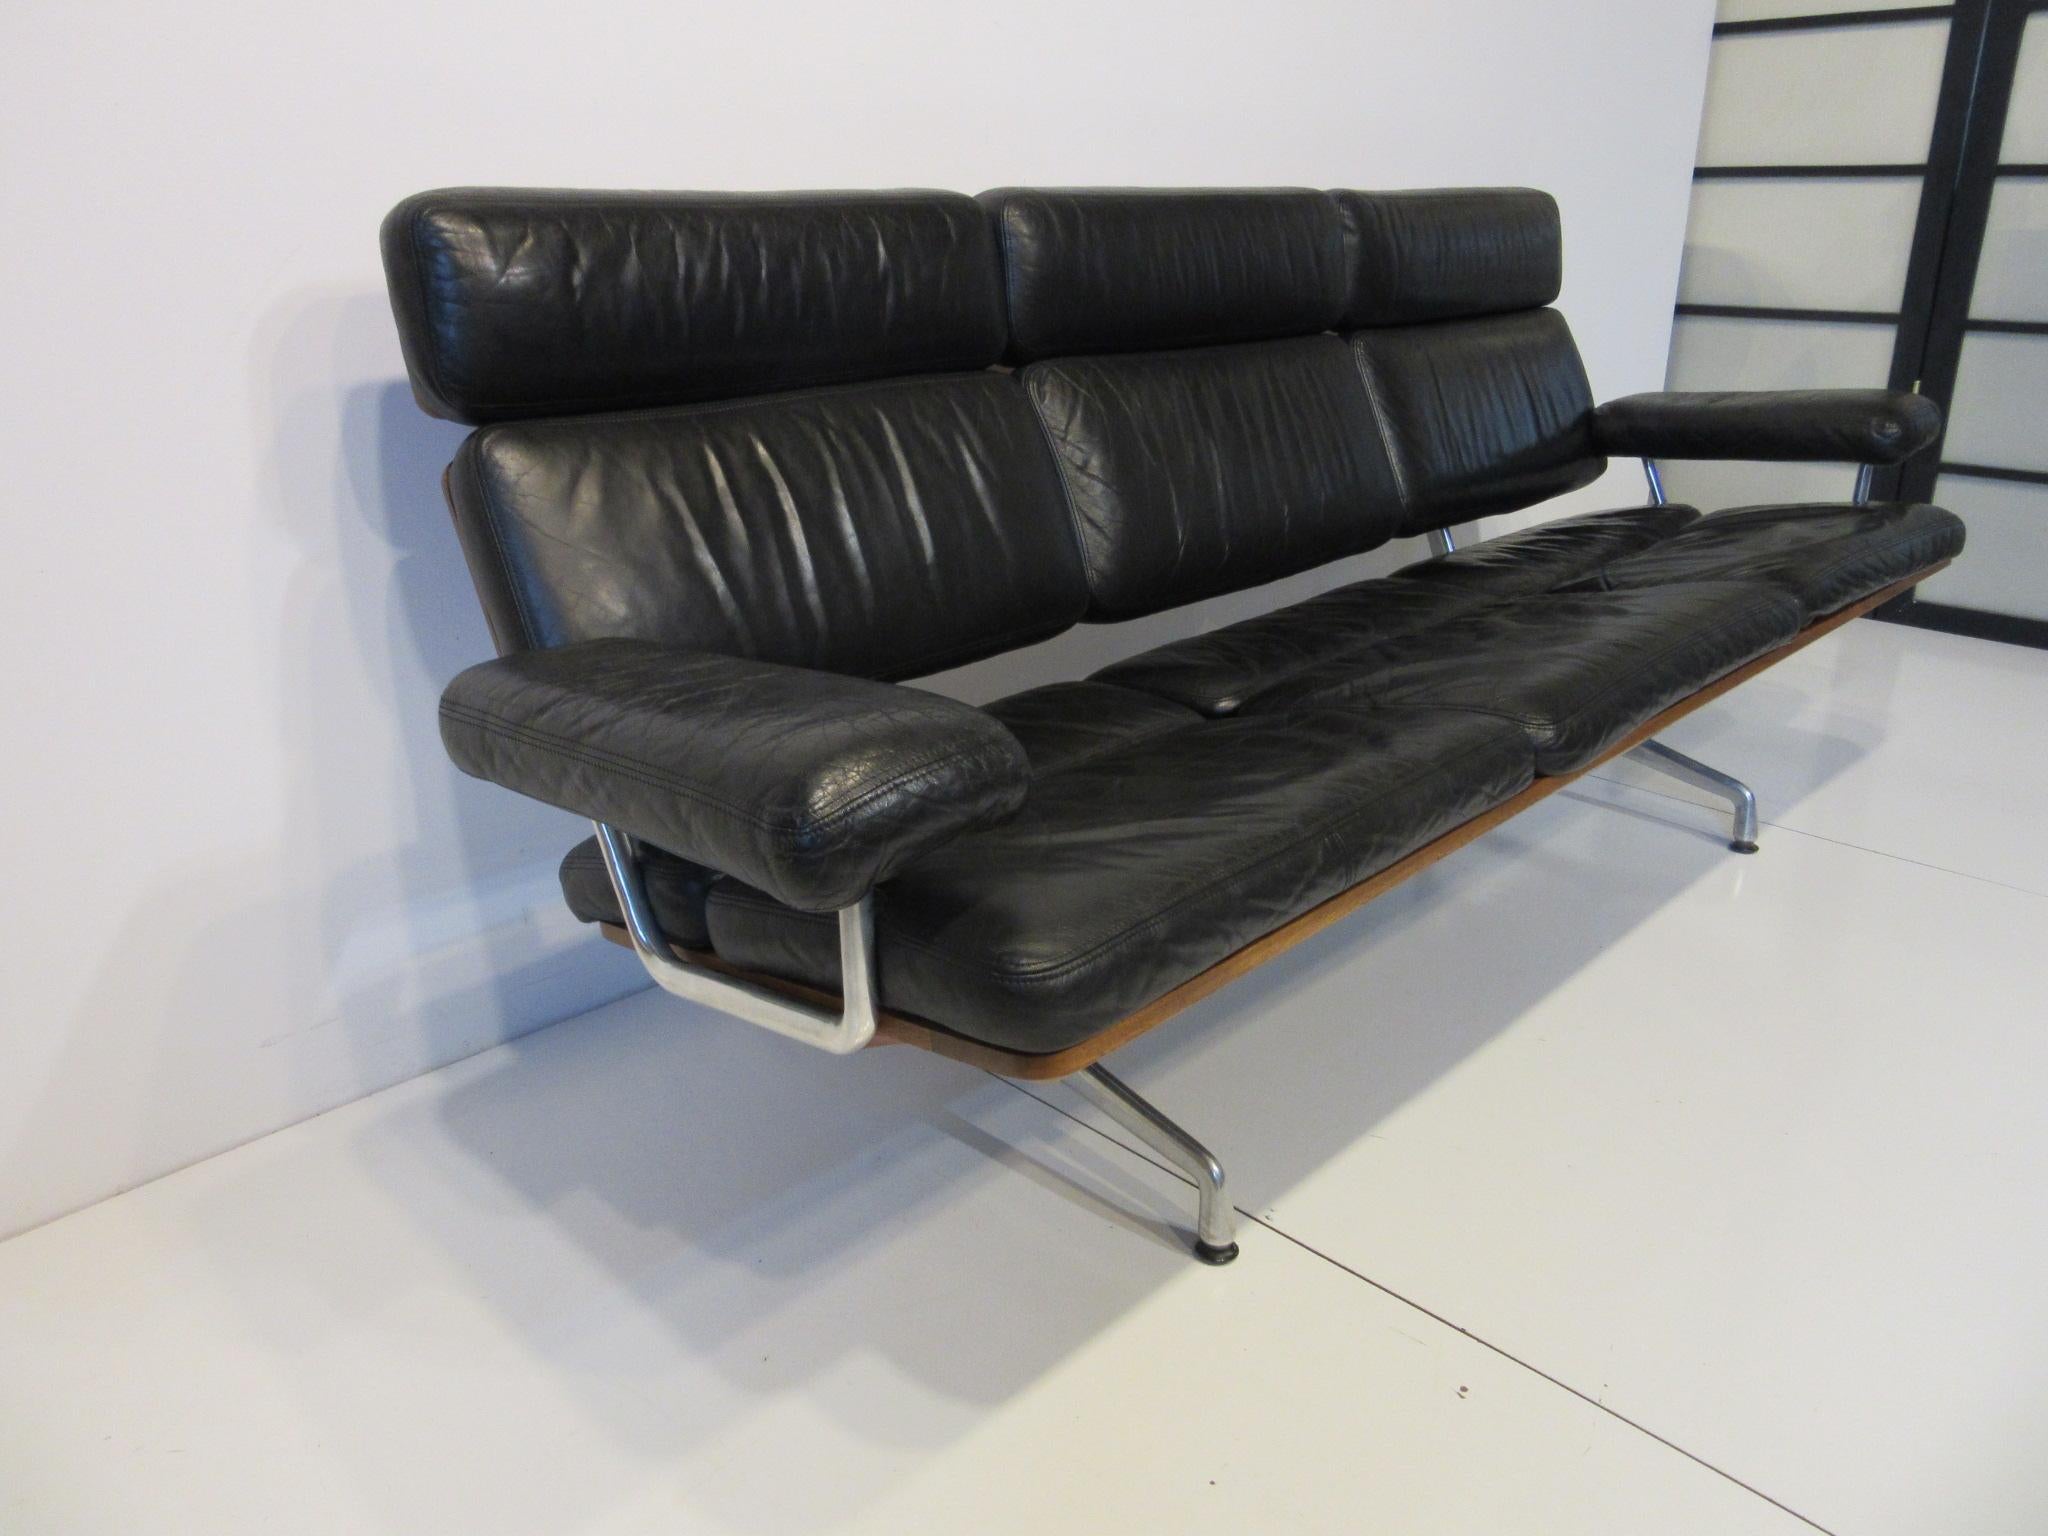 A rare and hard to find top of the line well crafted black leather soft pad sofa, with beautiful medium walnut back and cast aluminum legs. Model number 3473 one of the last designs put into production that was designed by the Charles Eames office.